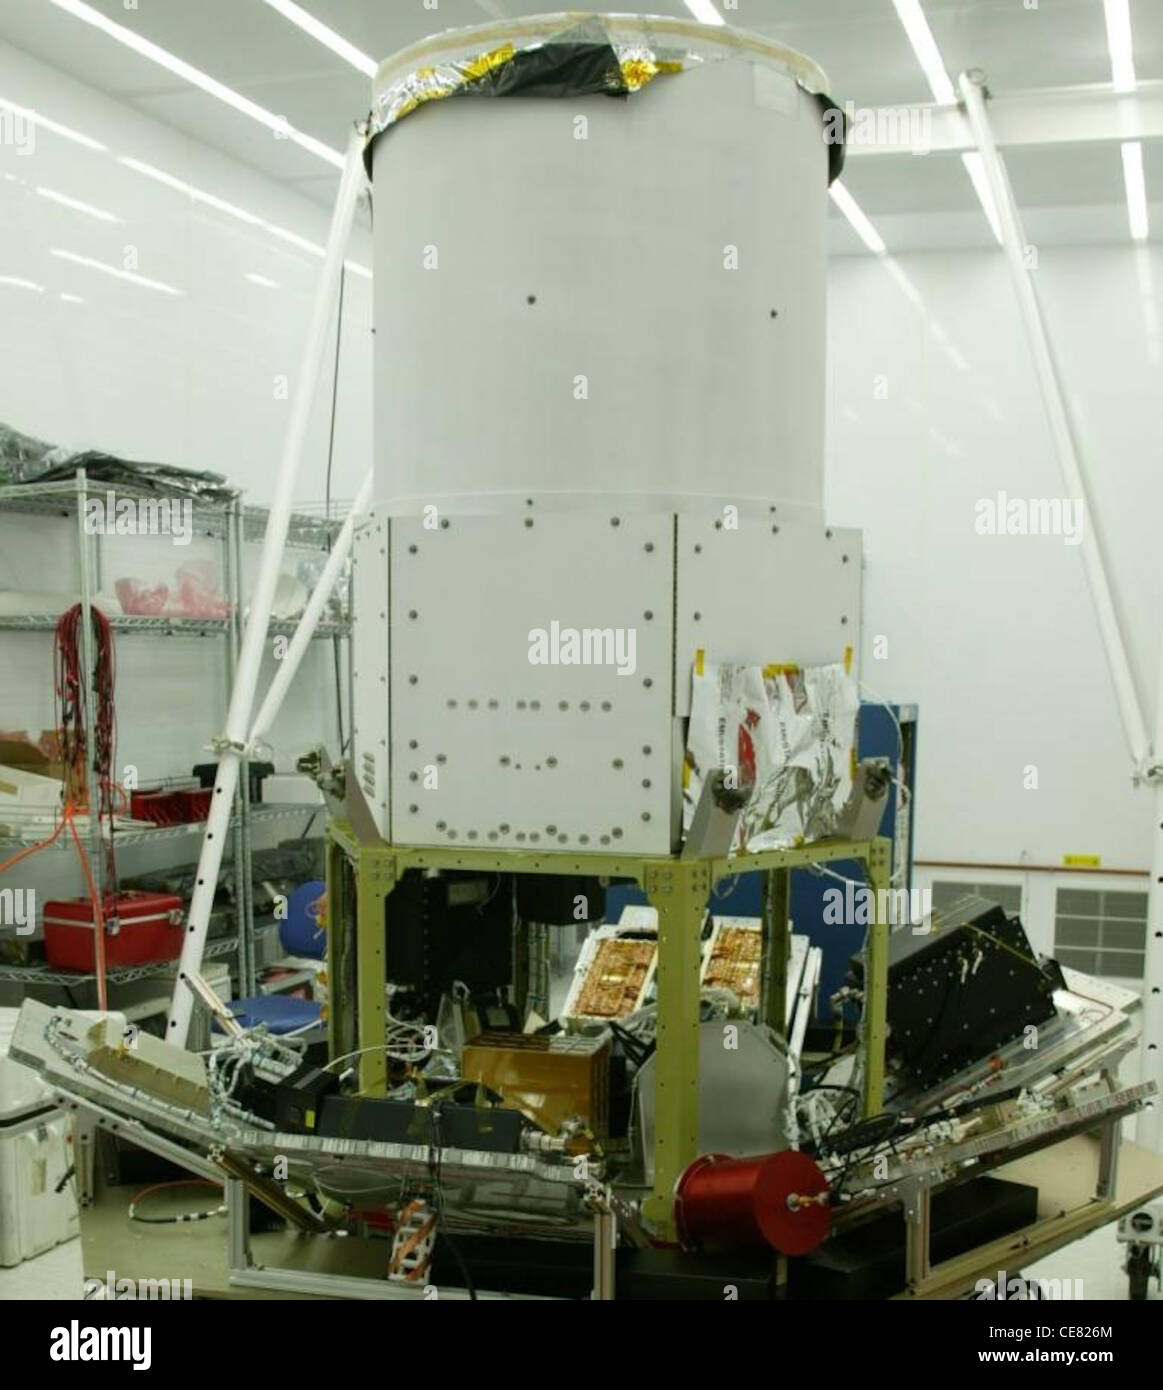 Integration of the modular bus components on Tactical Satellite-3 is photographed at the Air Force Research Laboratory's Space Vehicles Directorate, located at Kirtland Air Force Base, N.M. Stock Photo